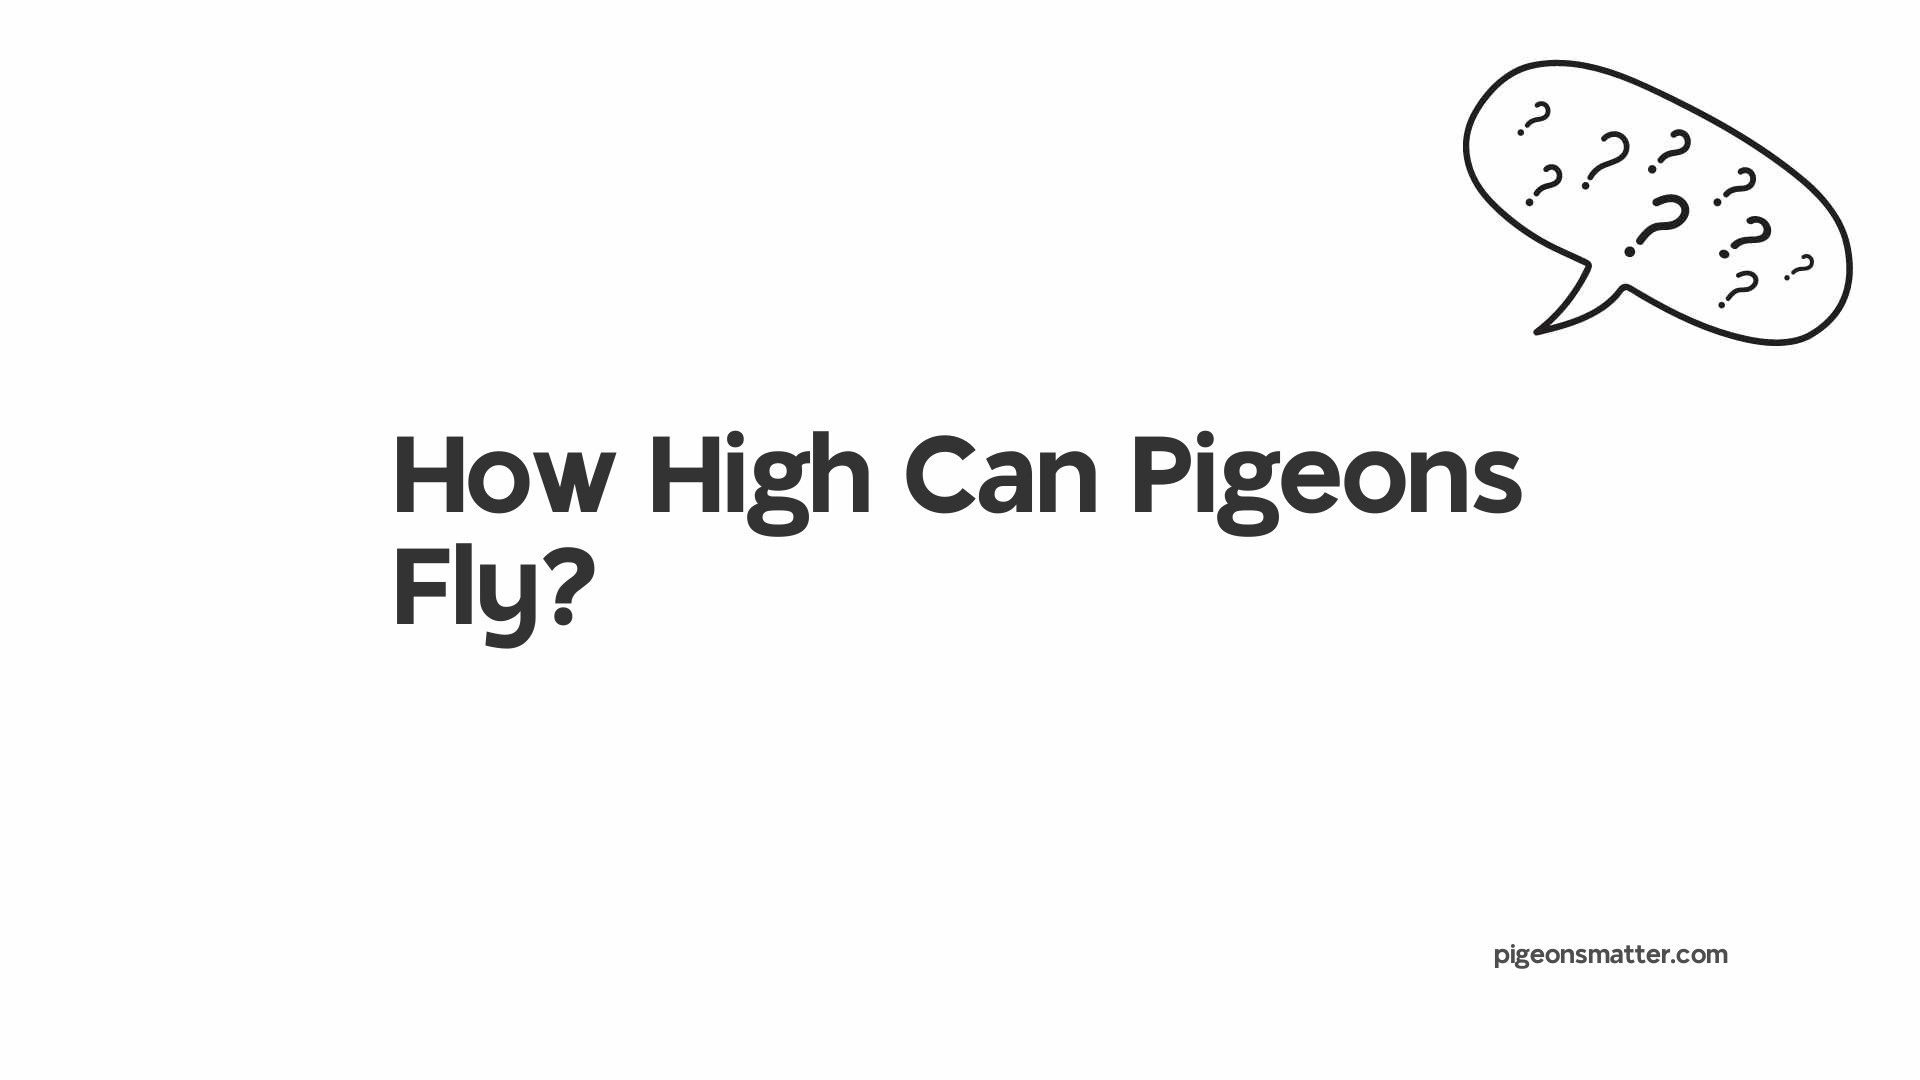 How High Can Pigeons Fly?